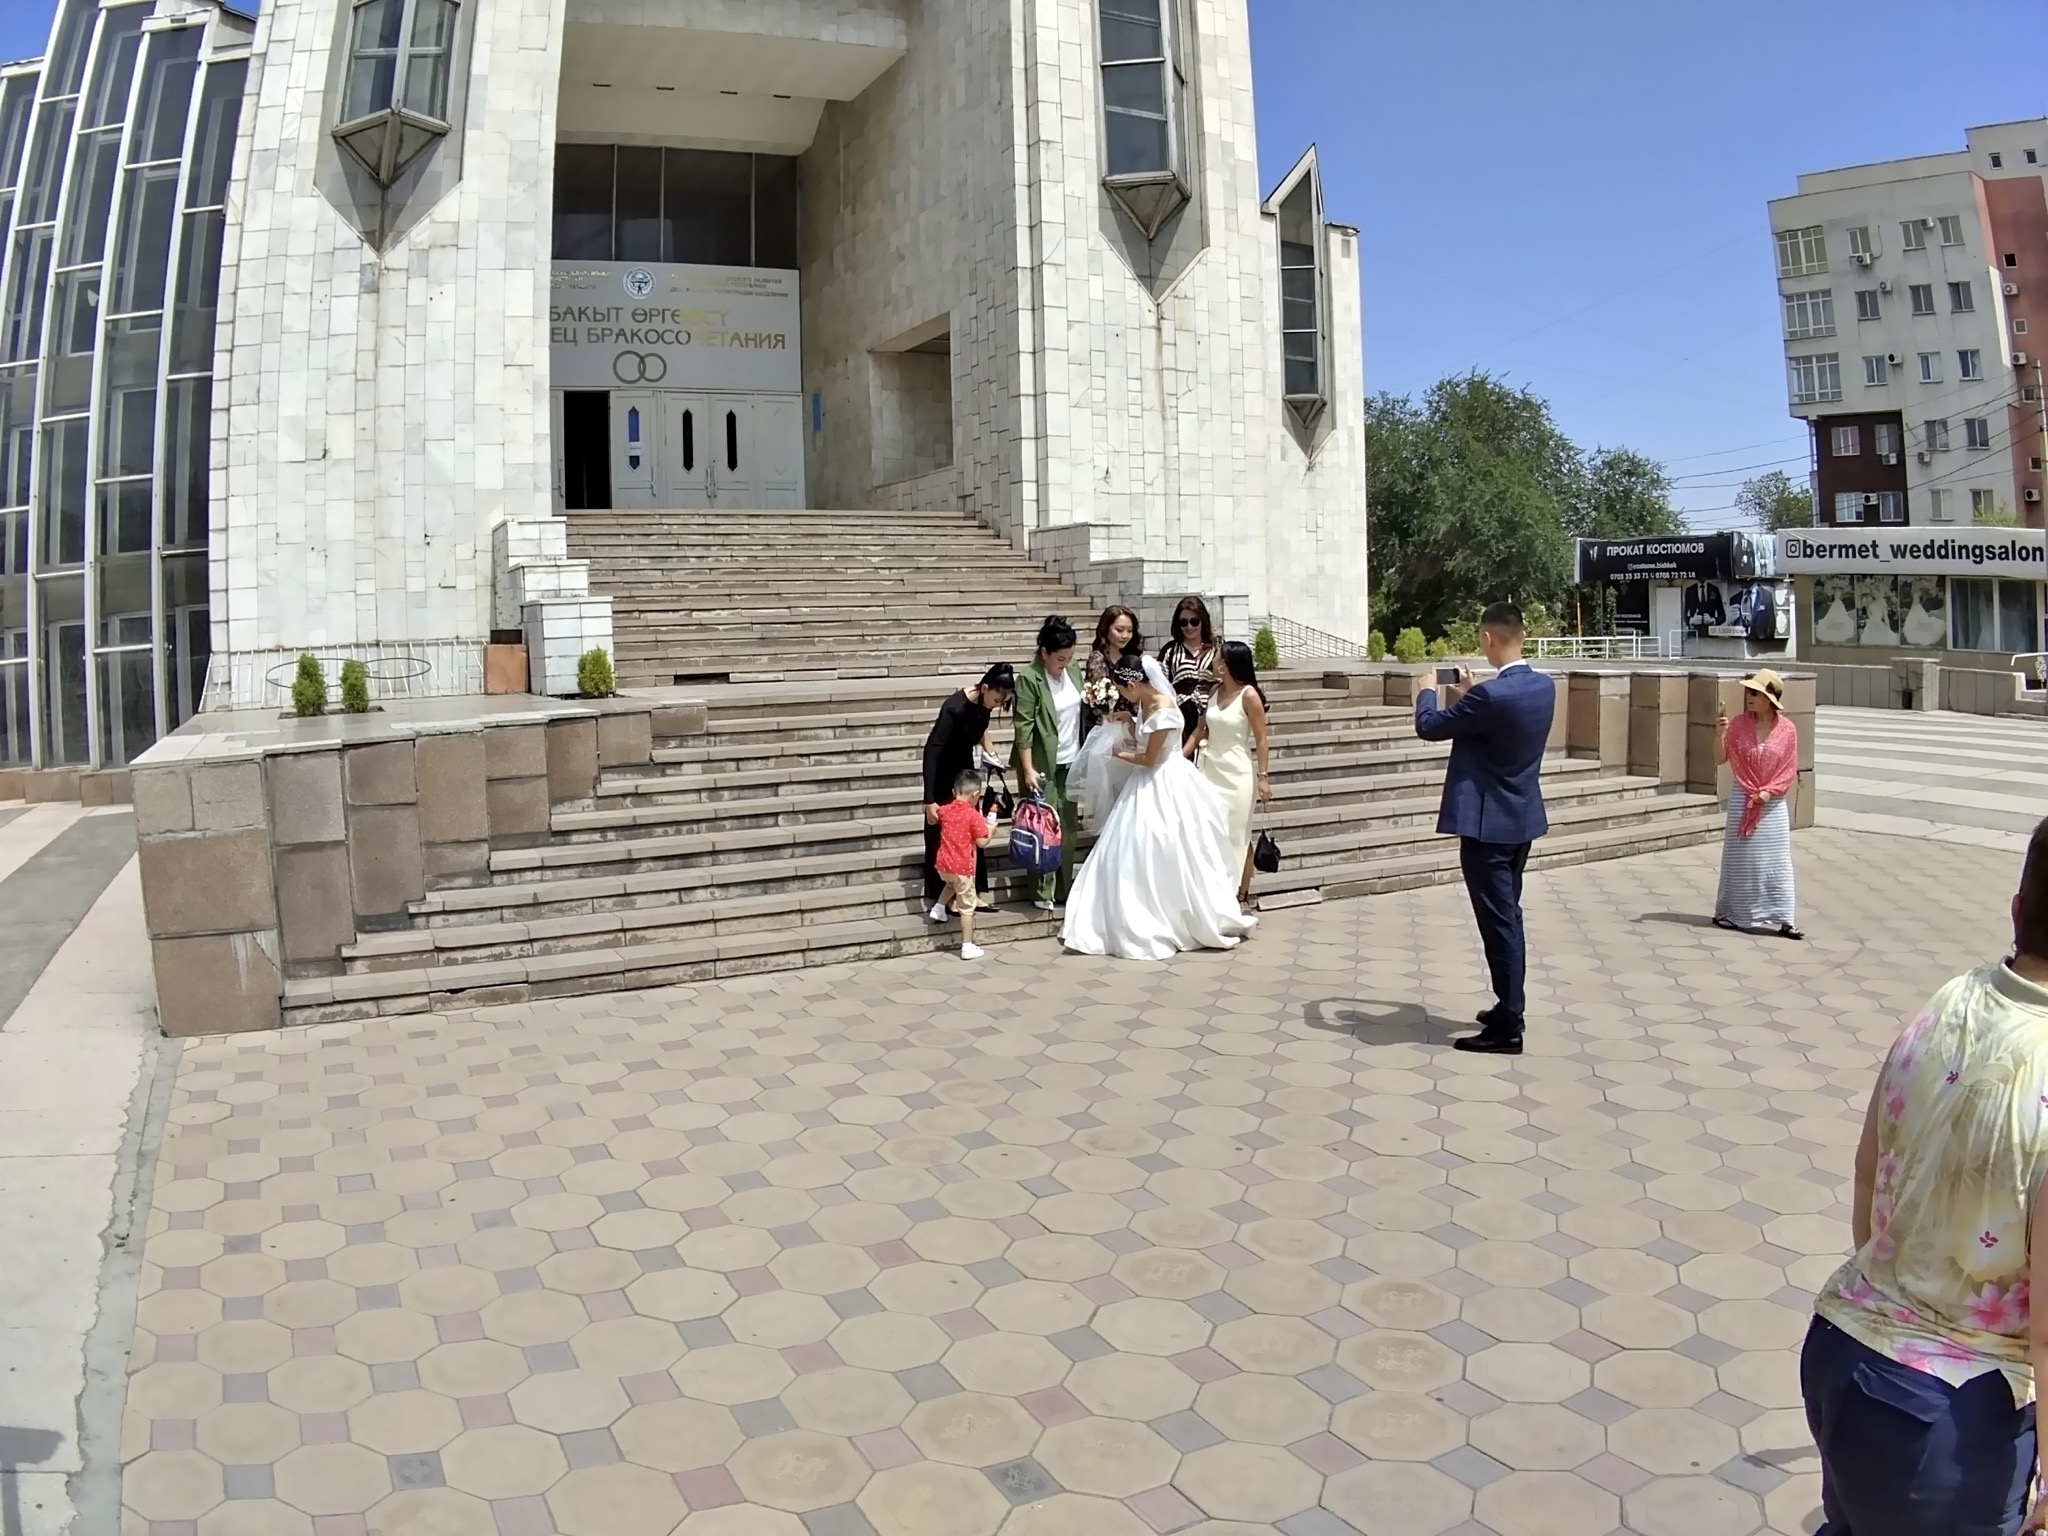 A wedding group in front of a facility